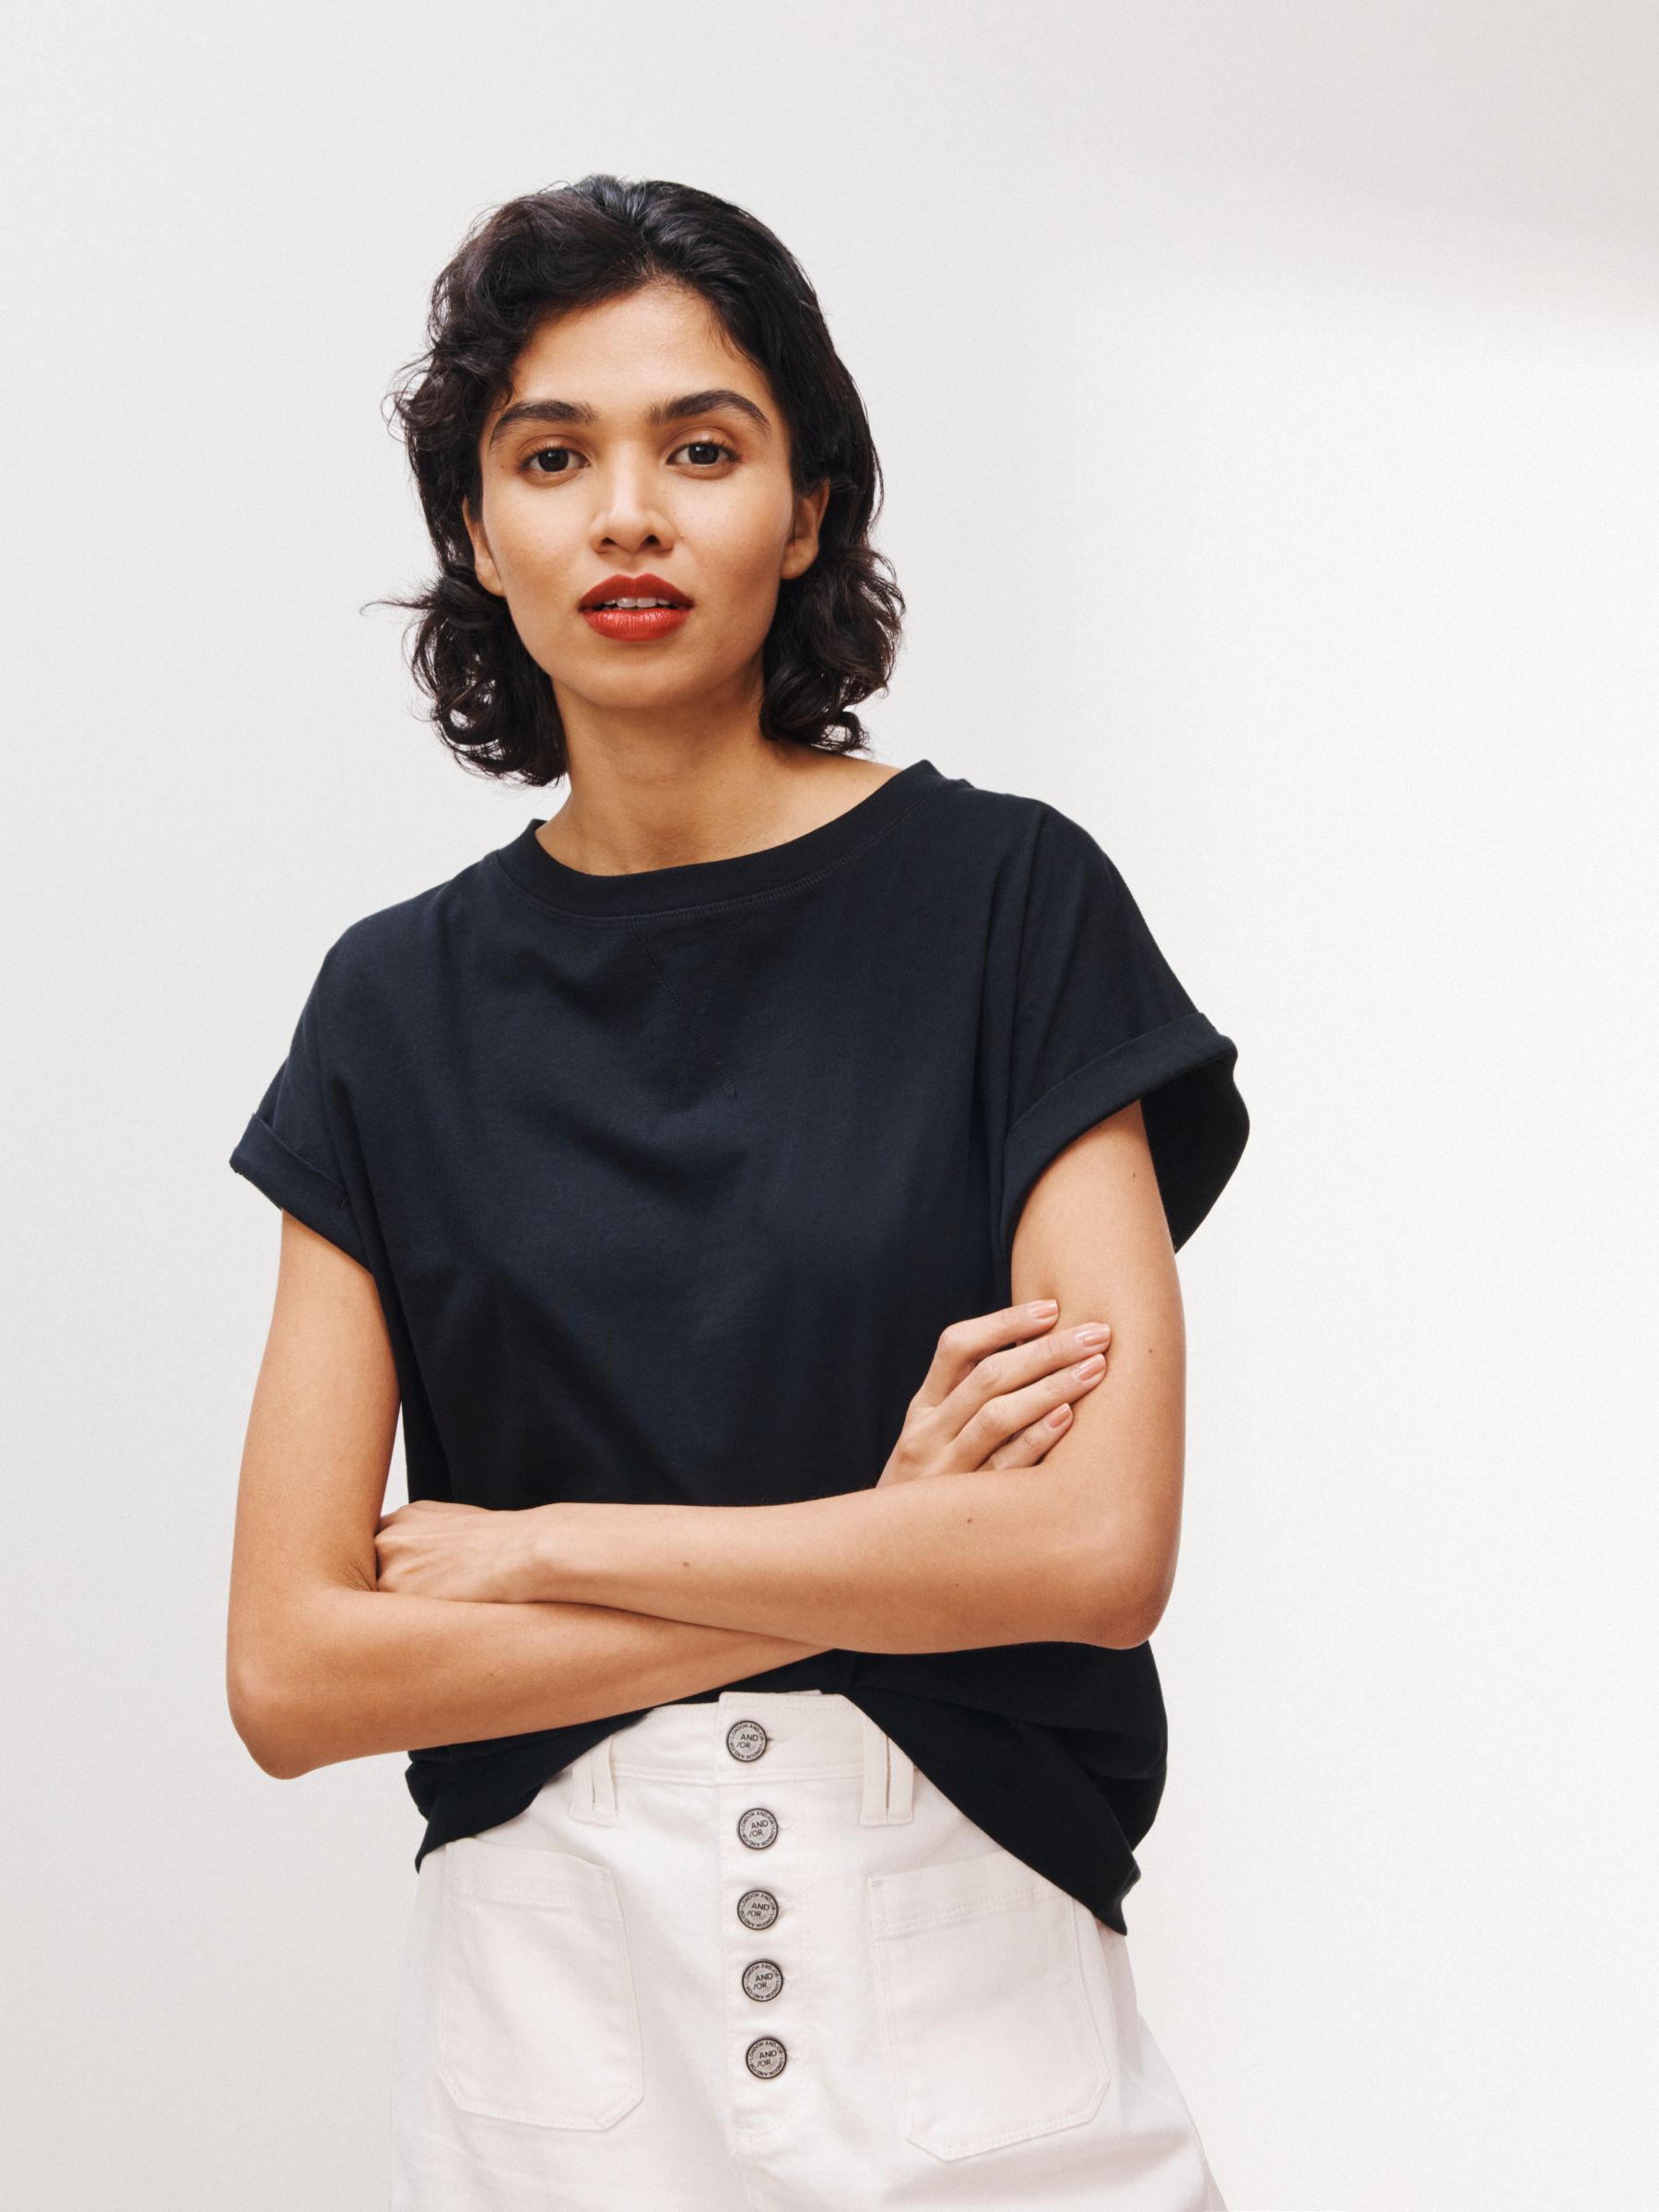 AND/OR Cotton Tank T-Shirt, Black at John Lewis & Partners